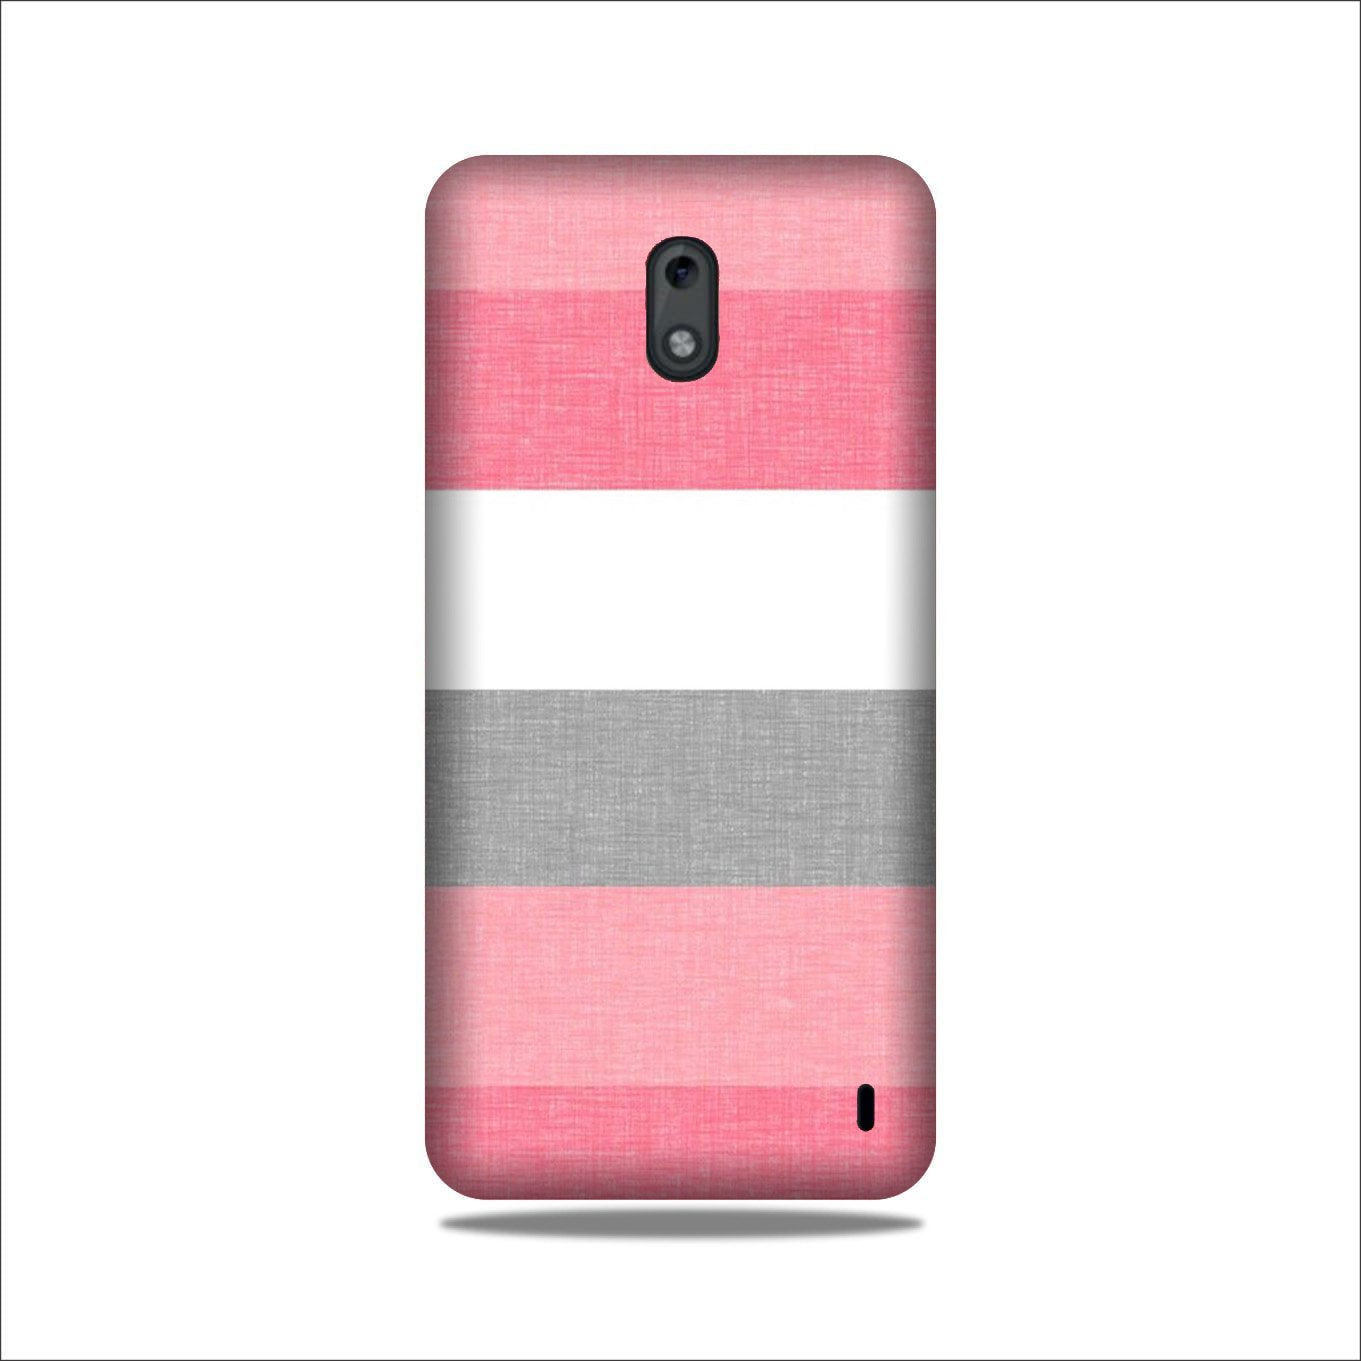 Pink white pattern Case for Nokia 3